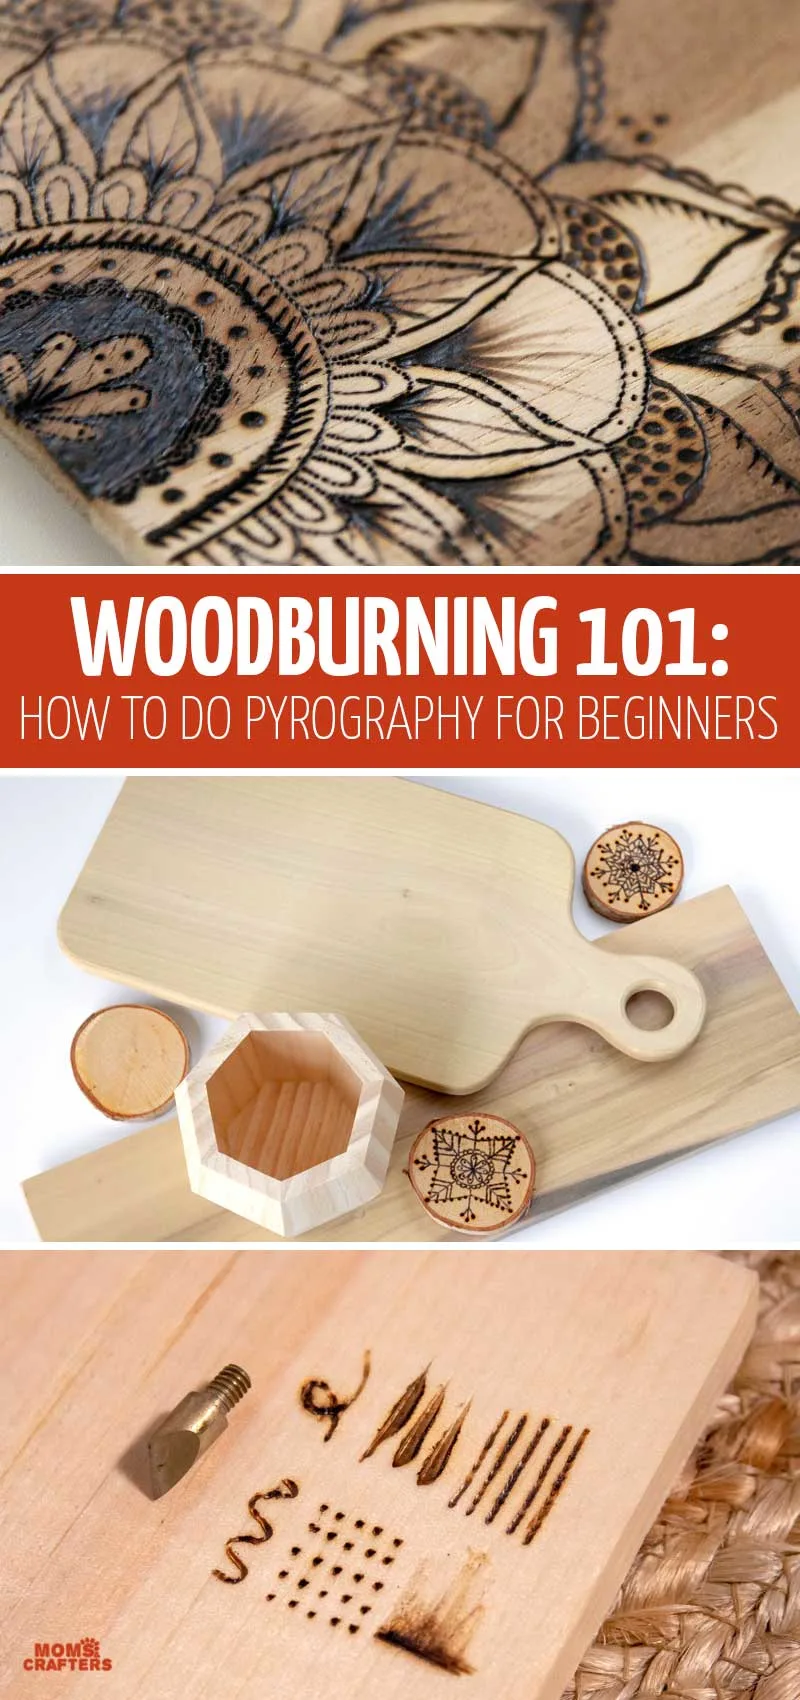 Click for a full woodburning tutorial for beginners! This teaches you woodburning tools, tips, techniques, patterns, strokes, designs, and more - basically everthing you need to know to learn how to do pyrography